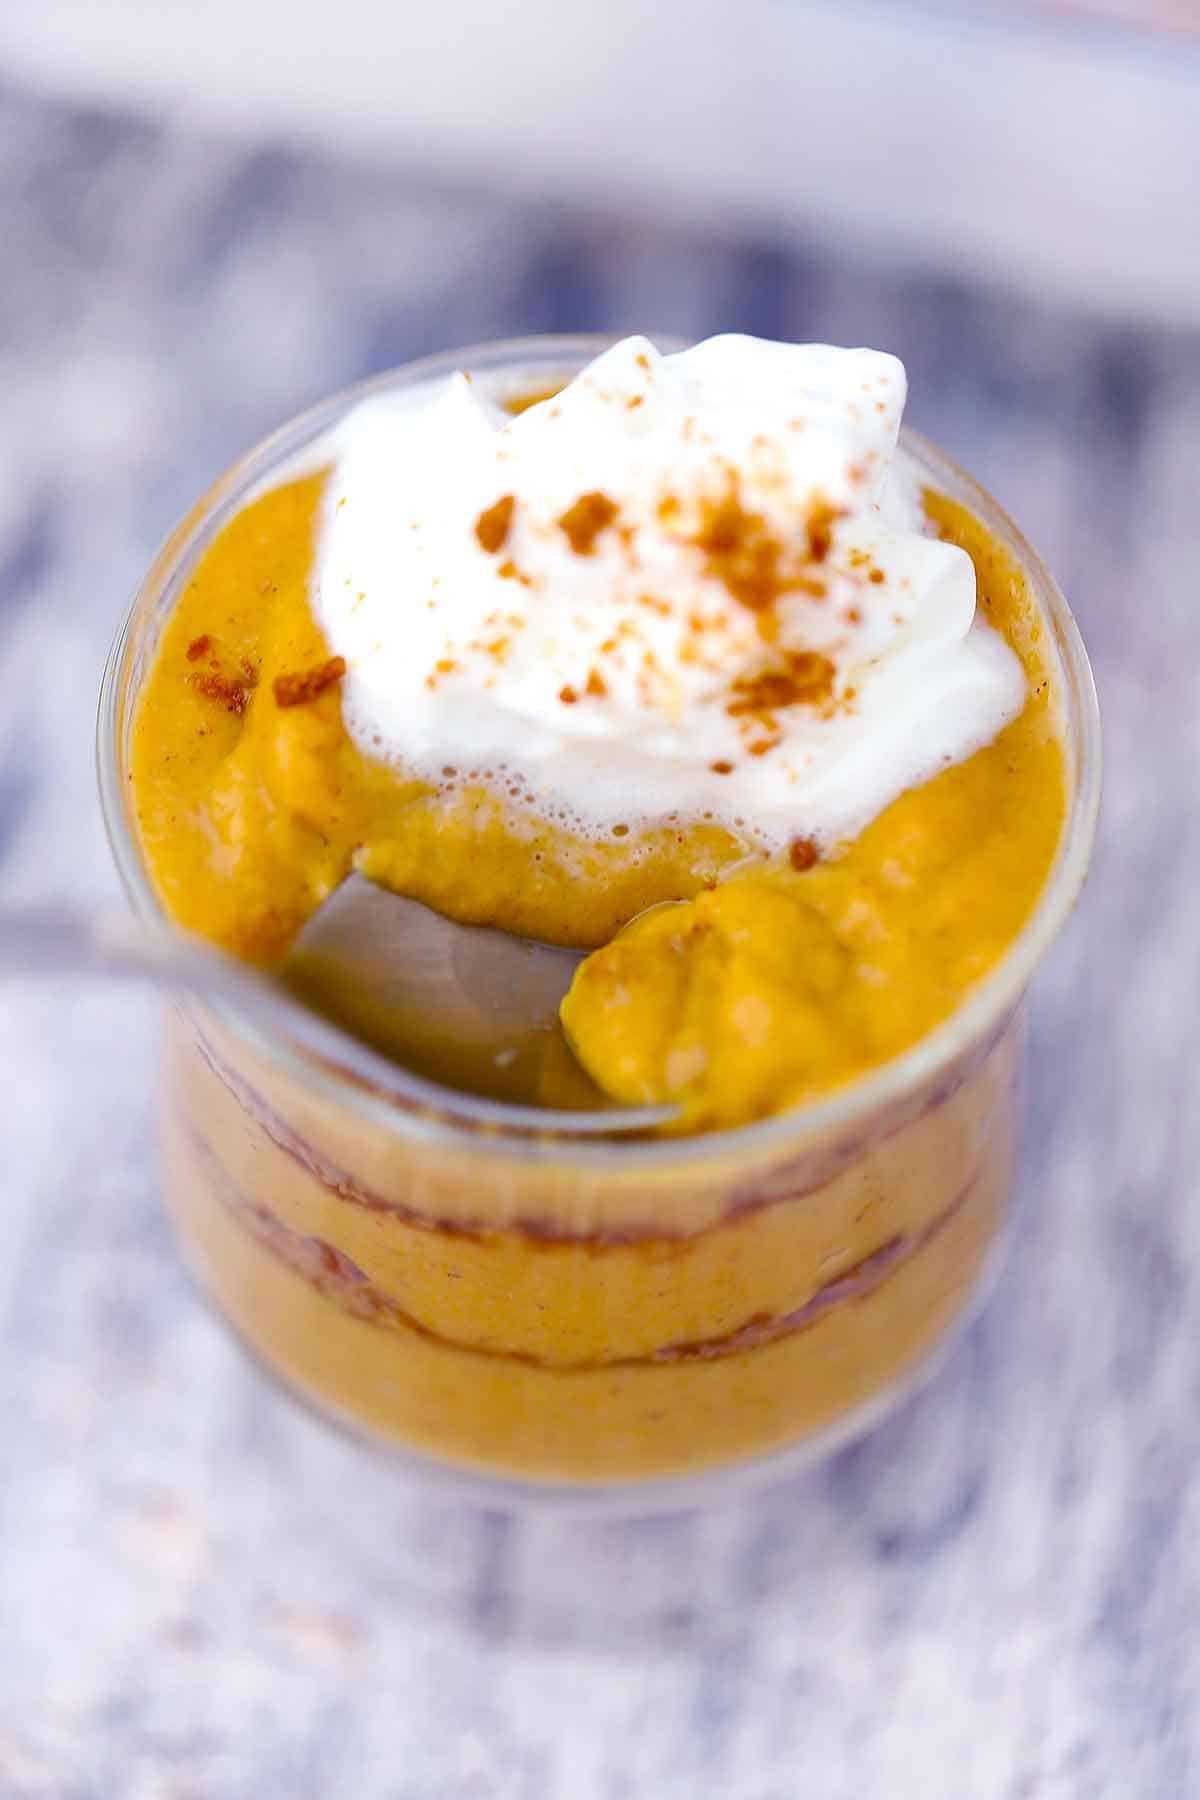 A spoon taking a scoop of pumpkin pudding out of a dessert glass.